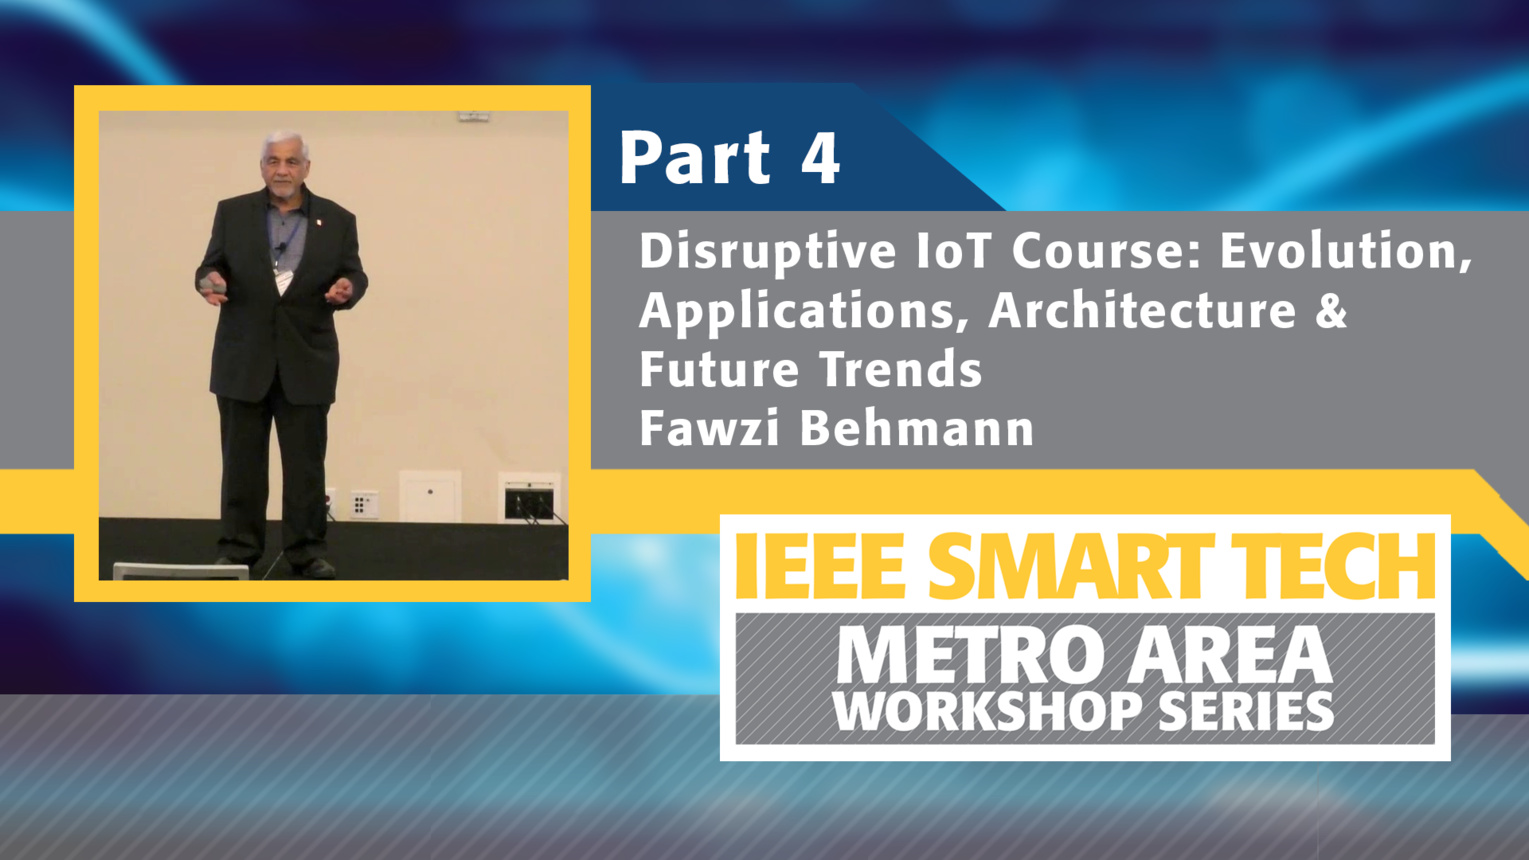 Disruptive Internet of Things course - Evolution, Applications, Architecture and Future Trends, Part 4